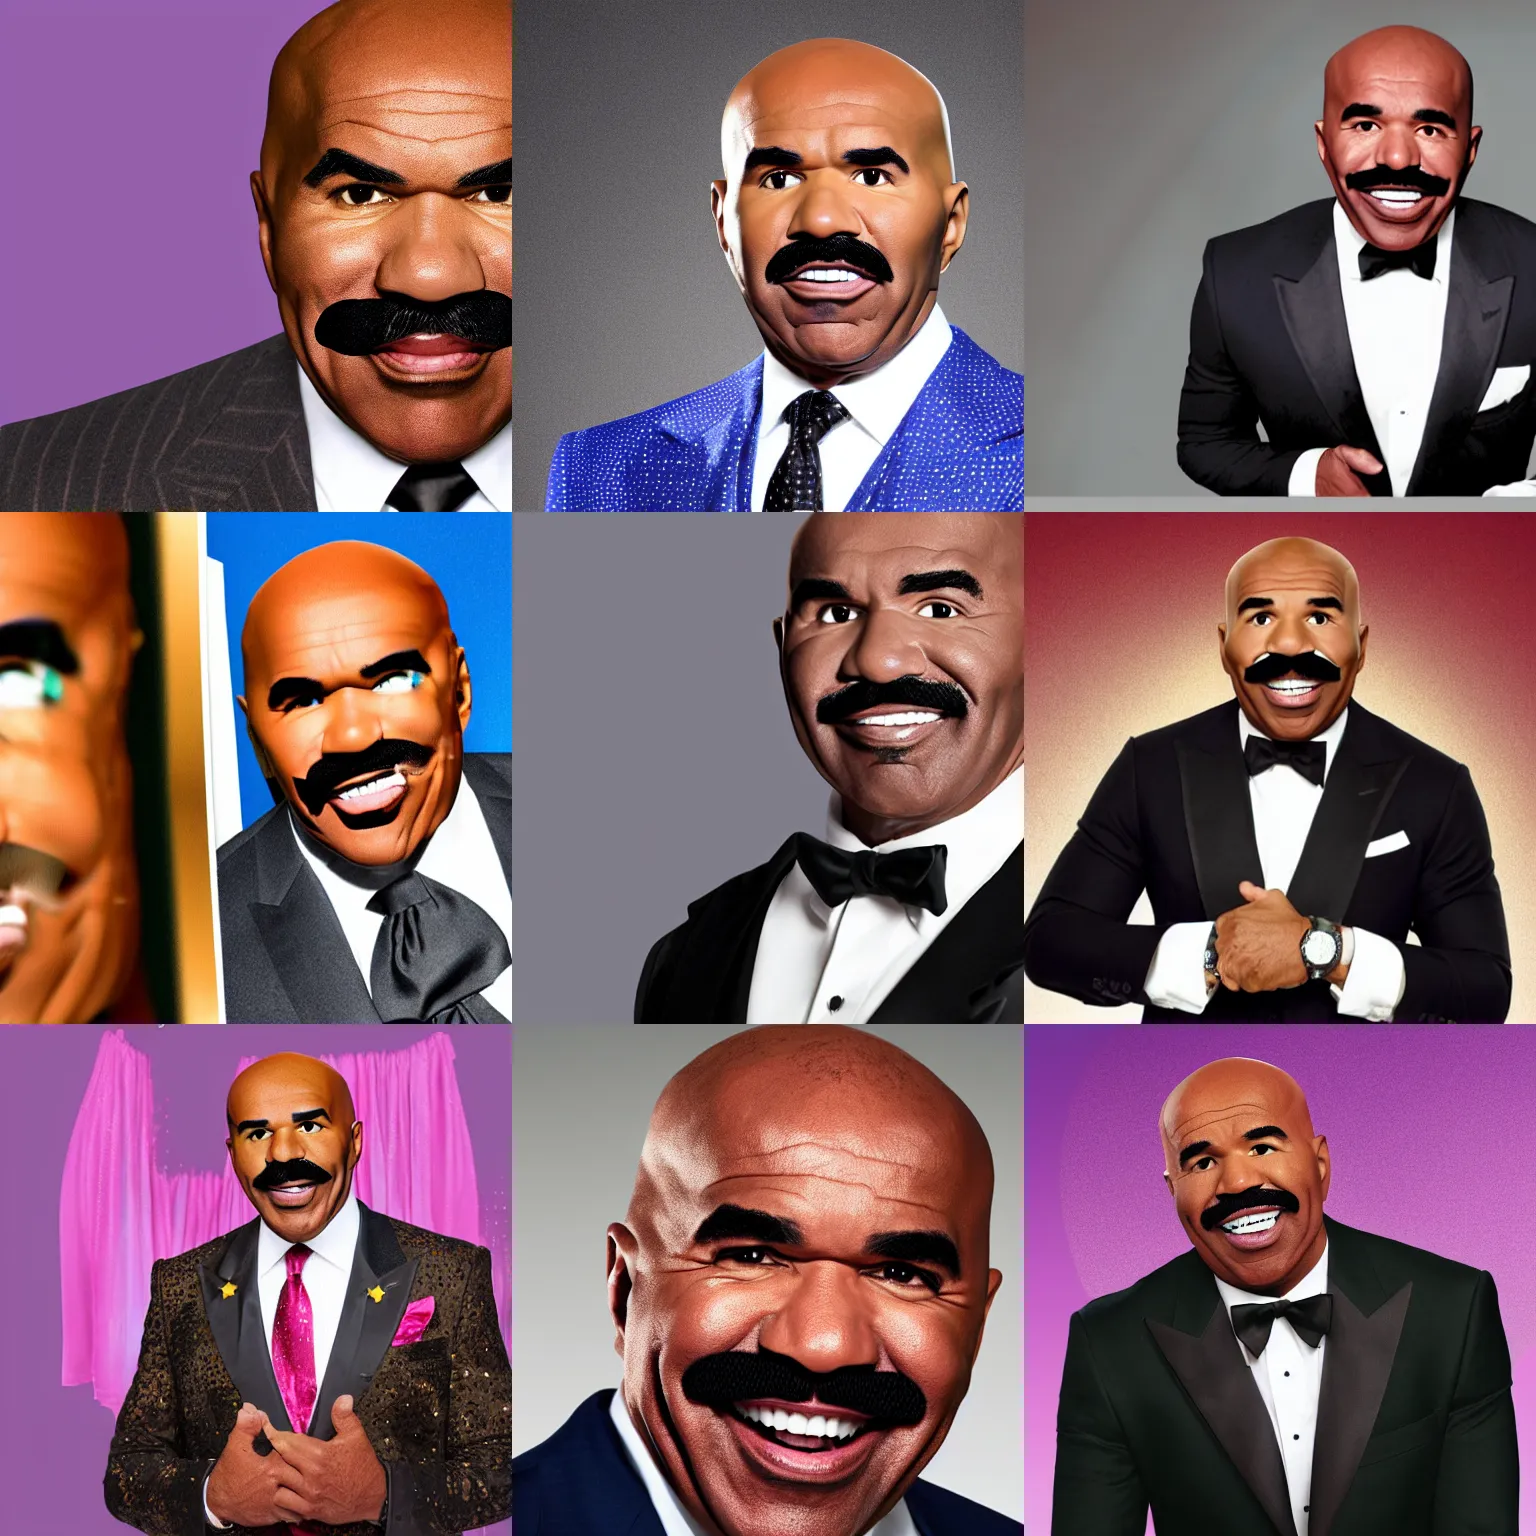 Prompt: a photoshop edit of steve harvey with gaping holes instead of eyes